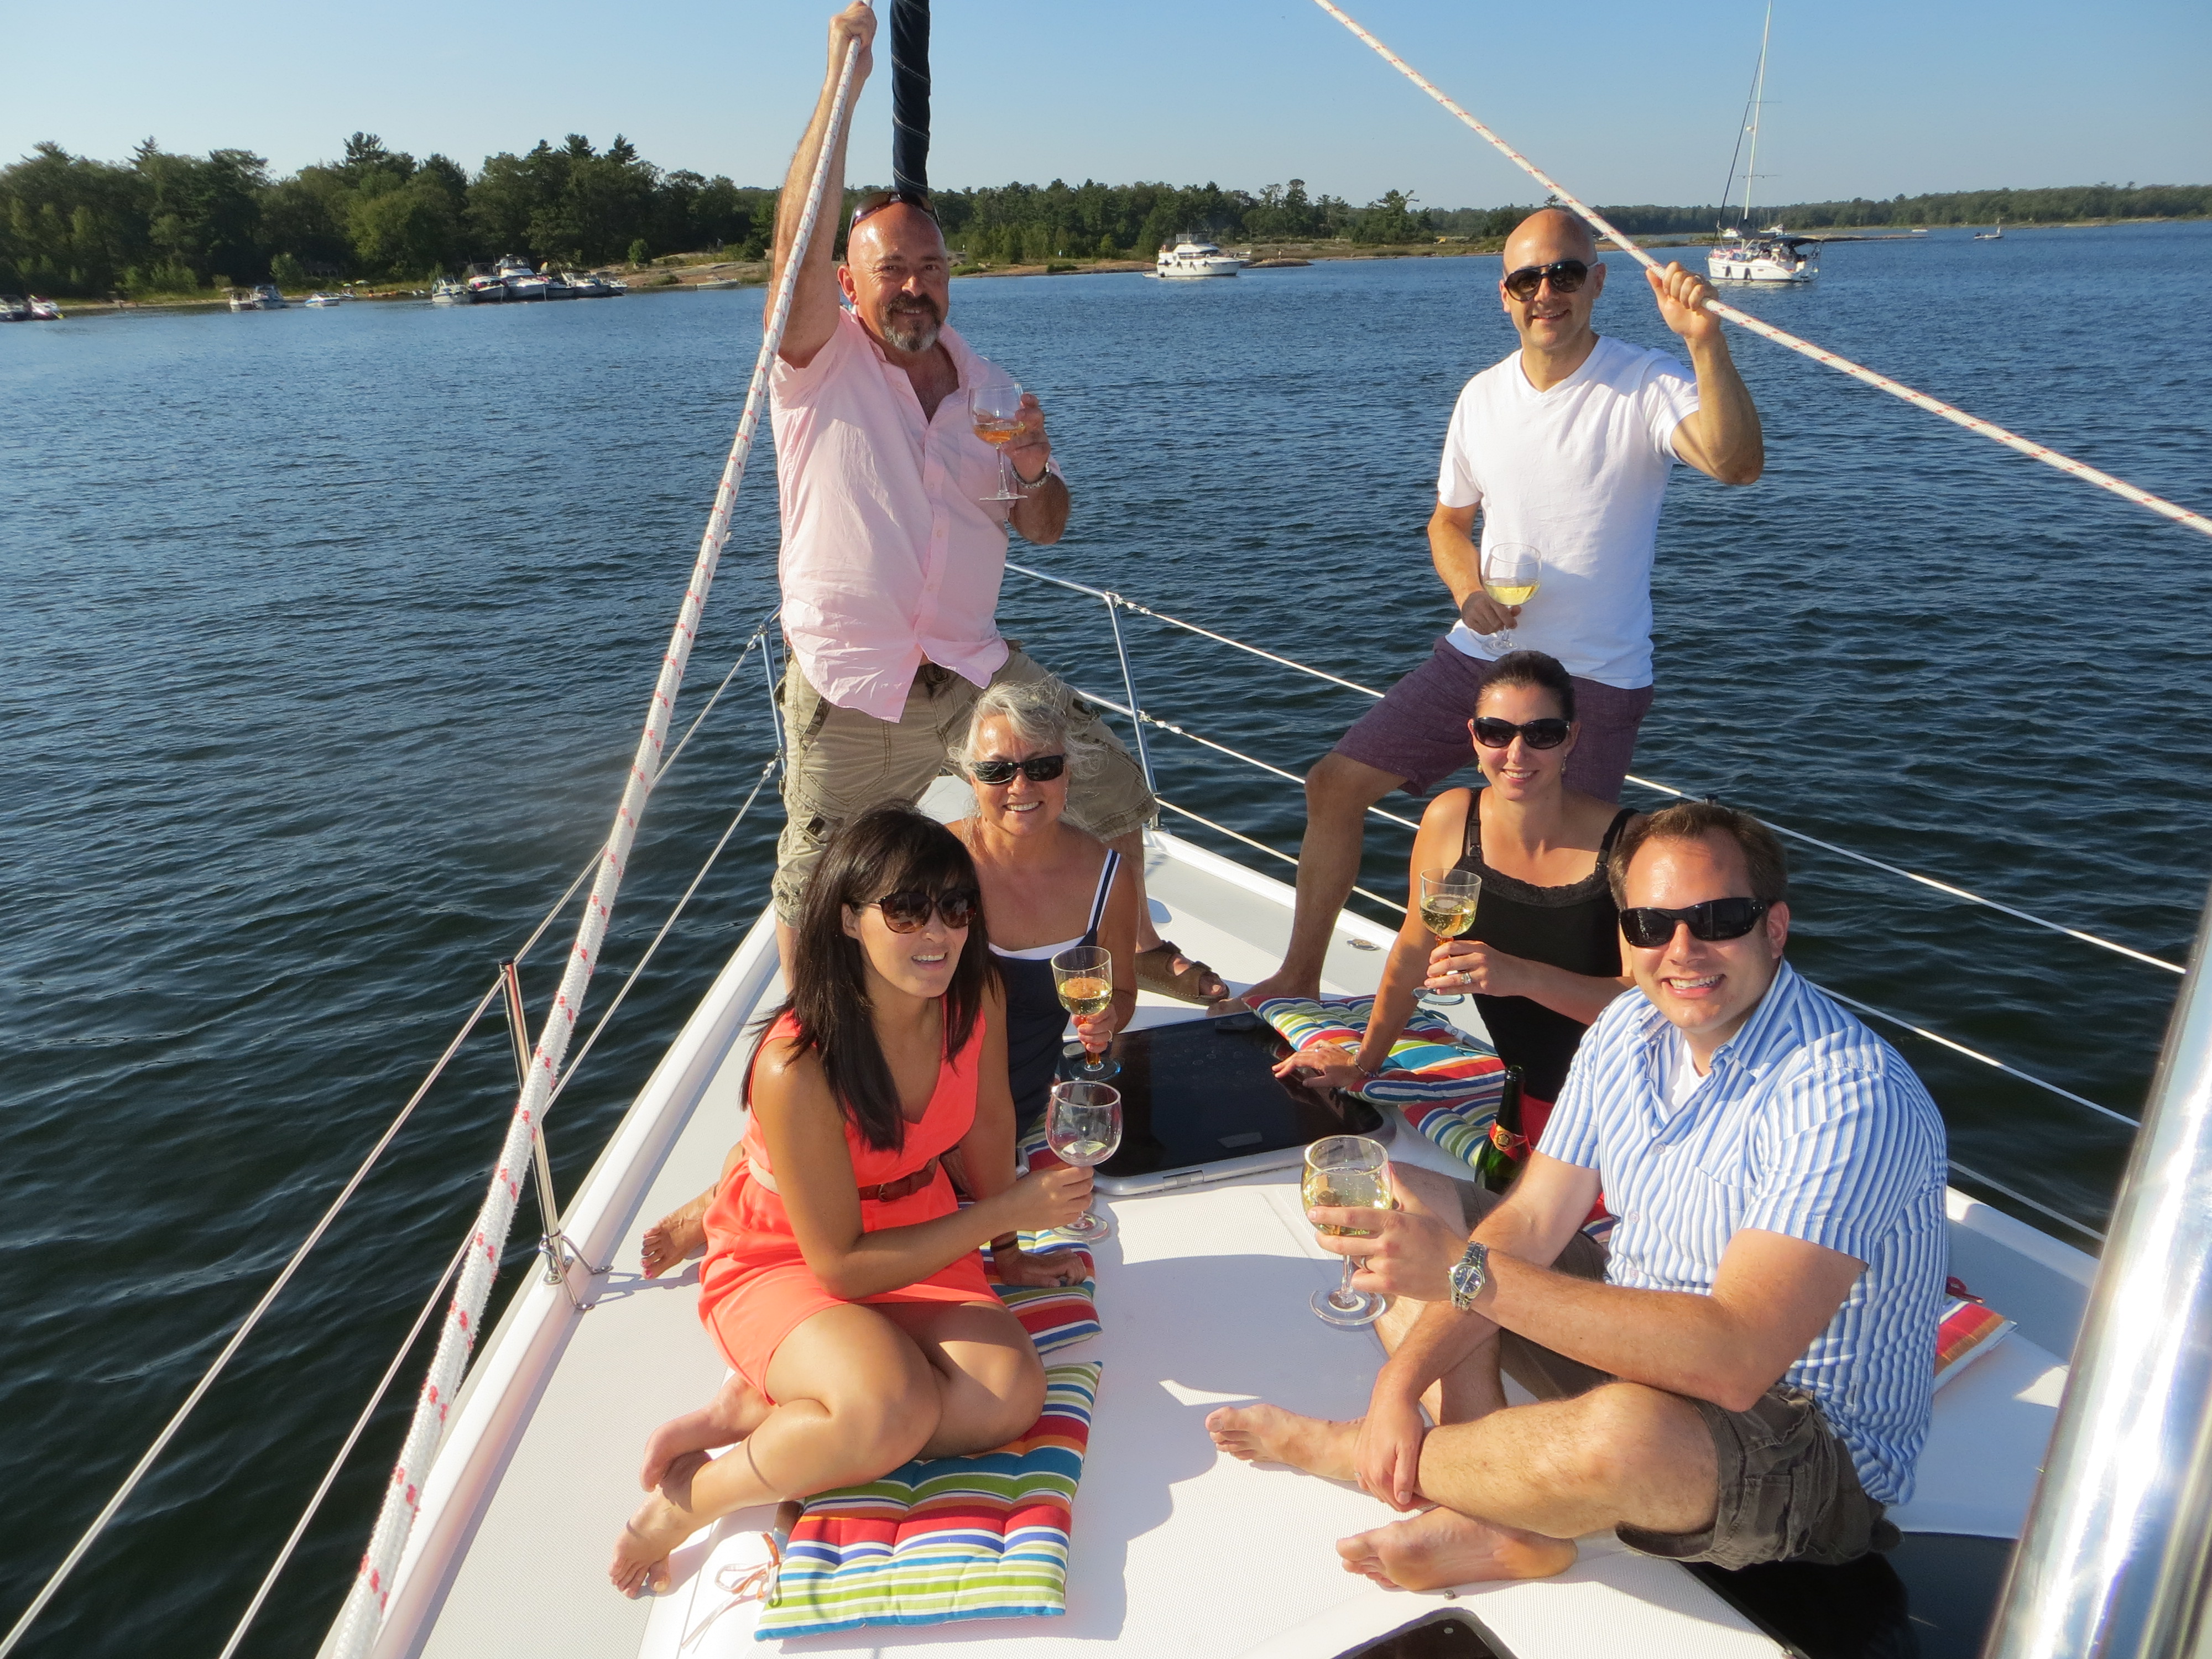 images/Robitaille-Dinner%20Cruise-Aug2013.JPG